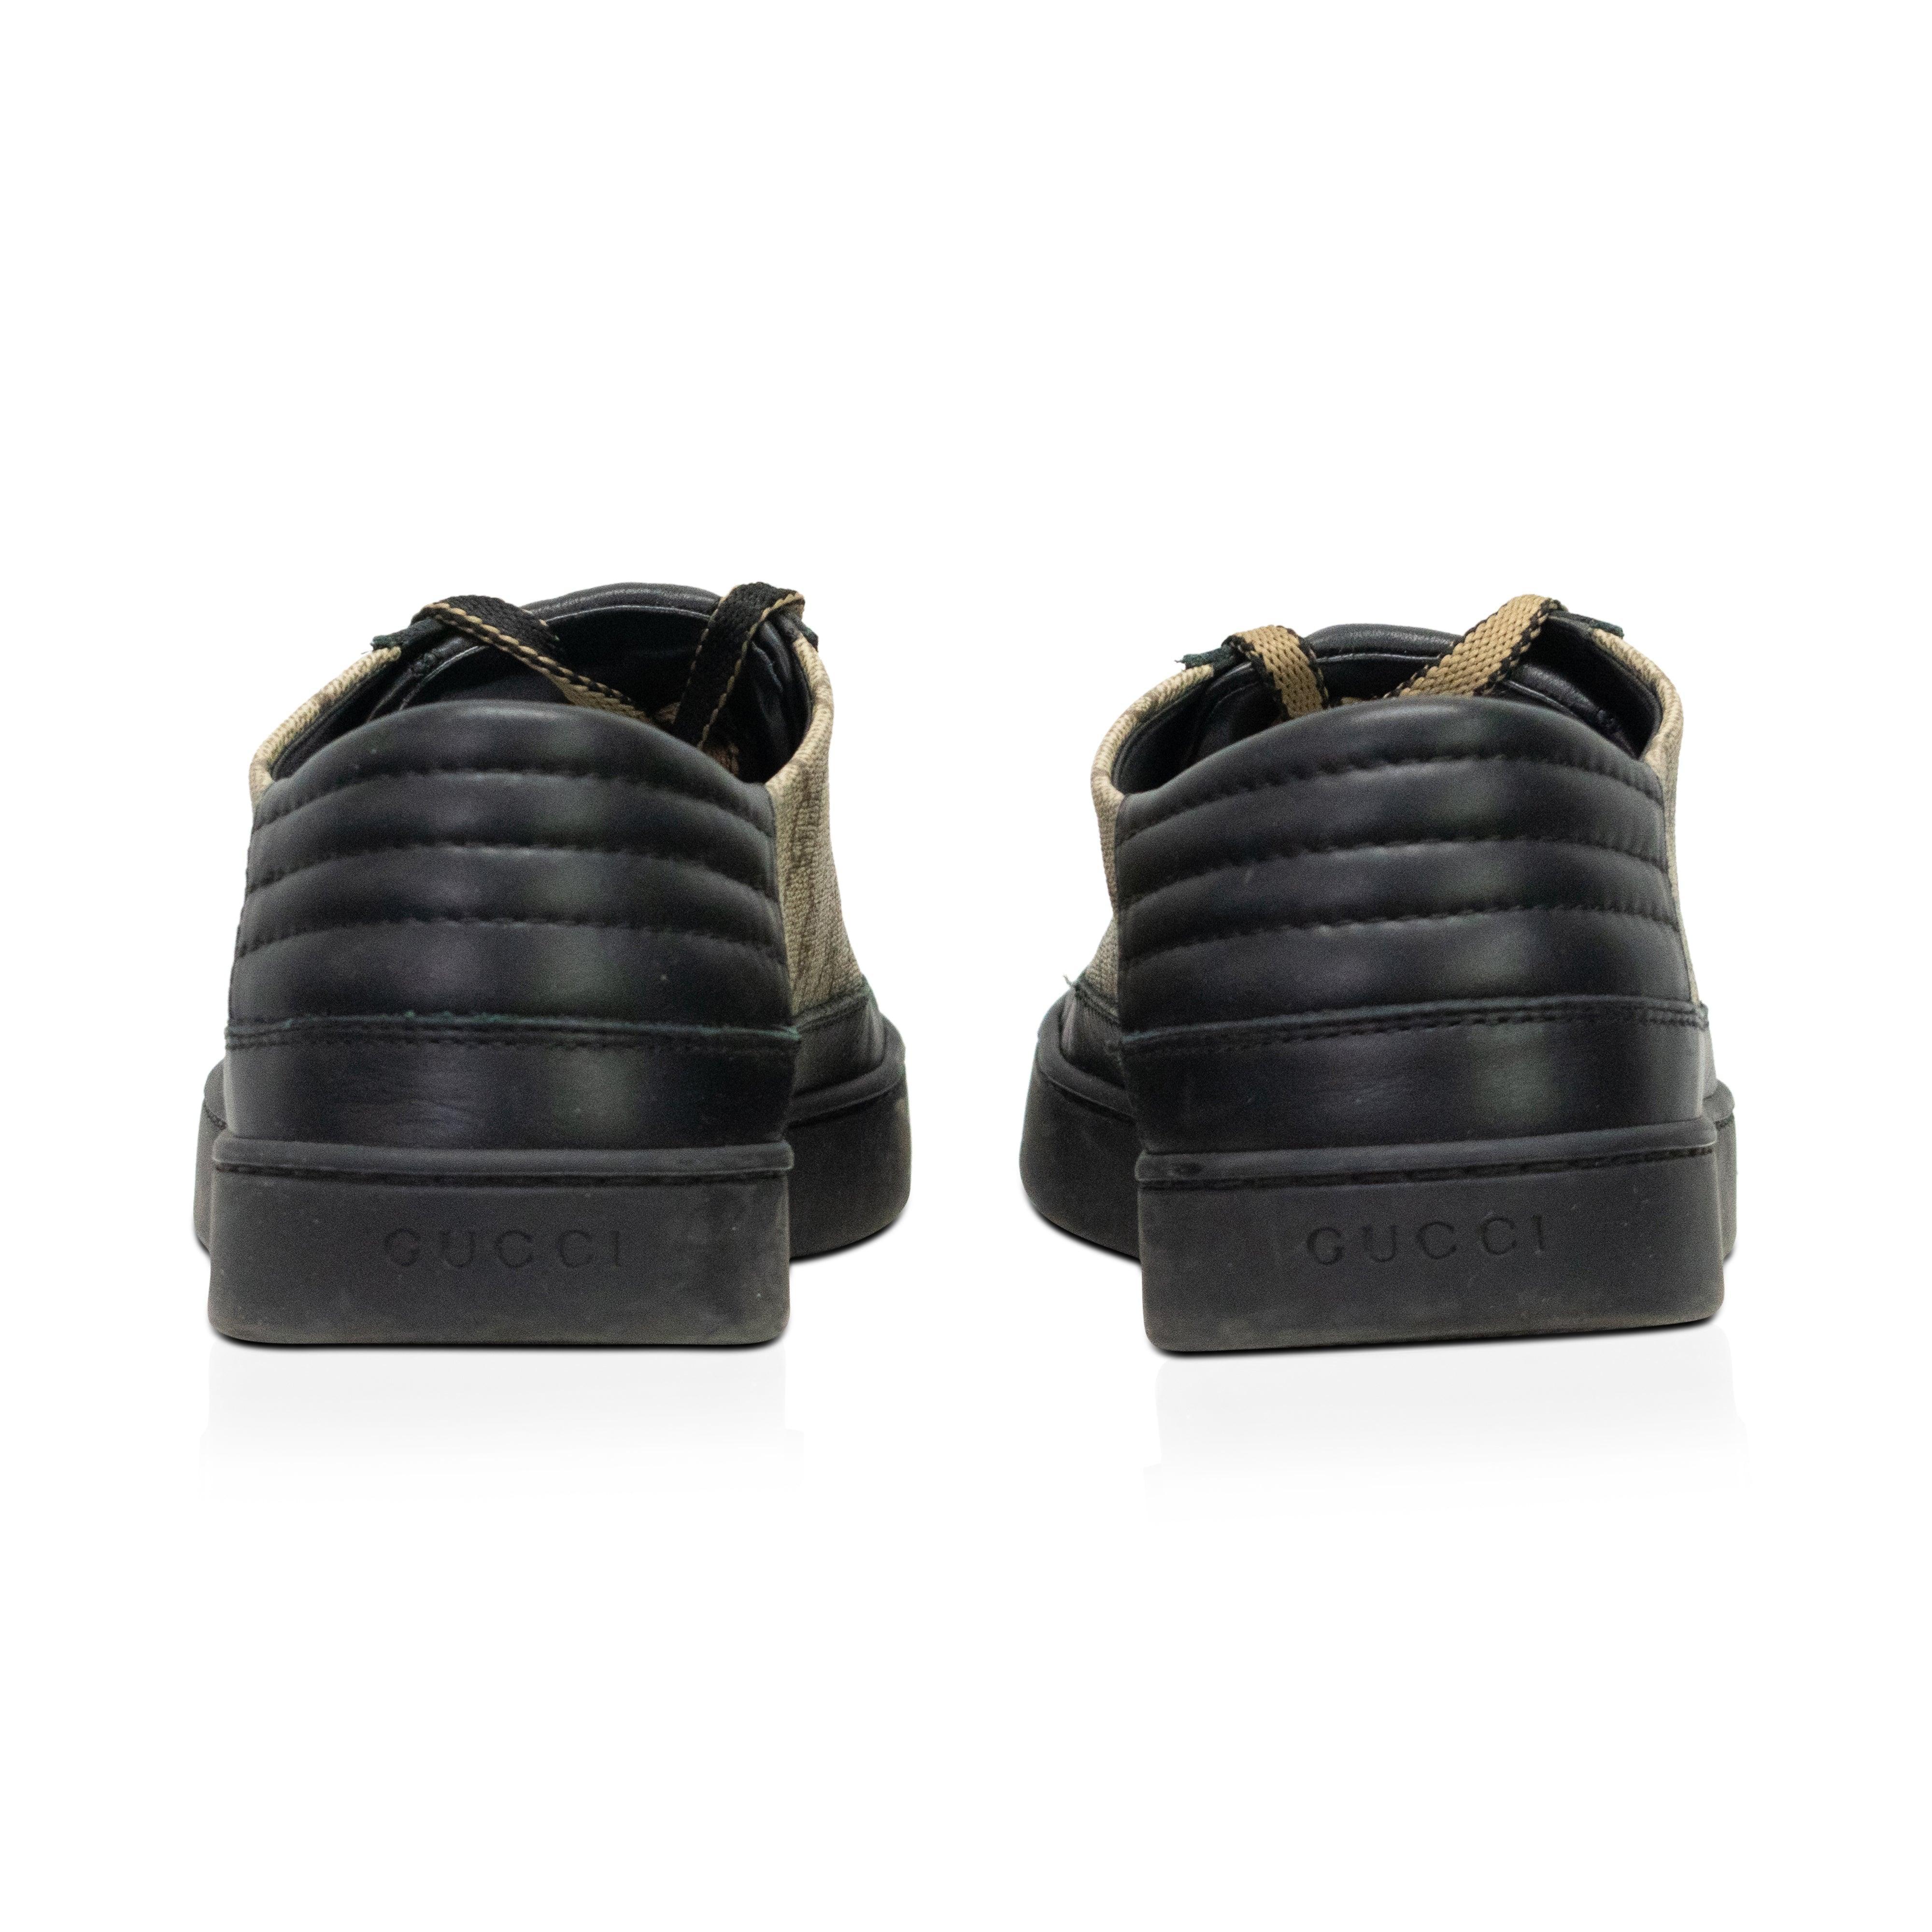 Gucci Sneakers - Men's 7.5 - Fashionably Yours